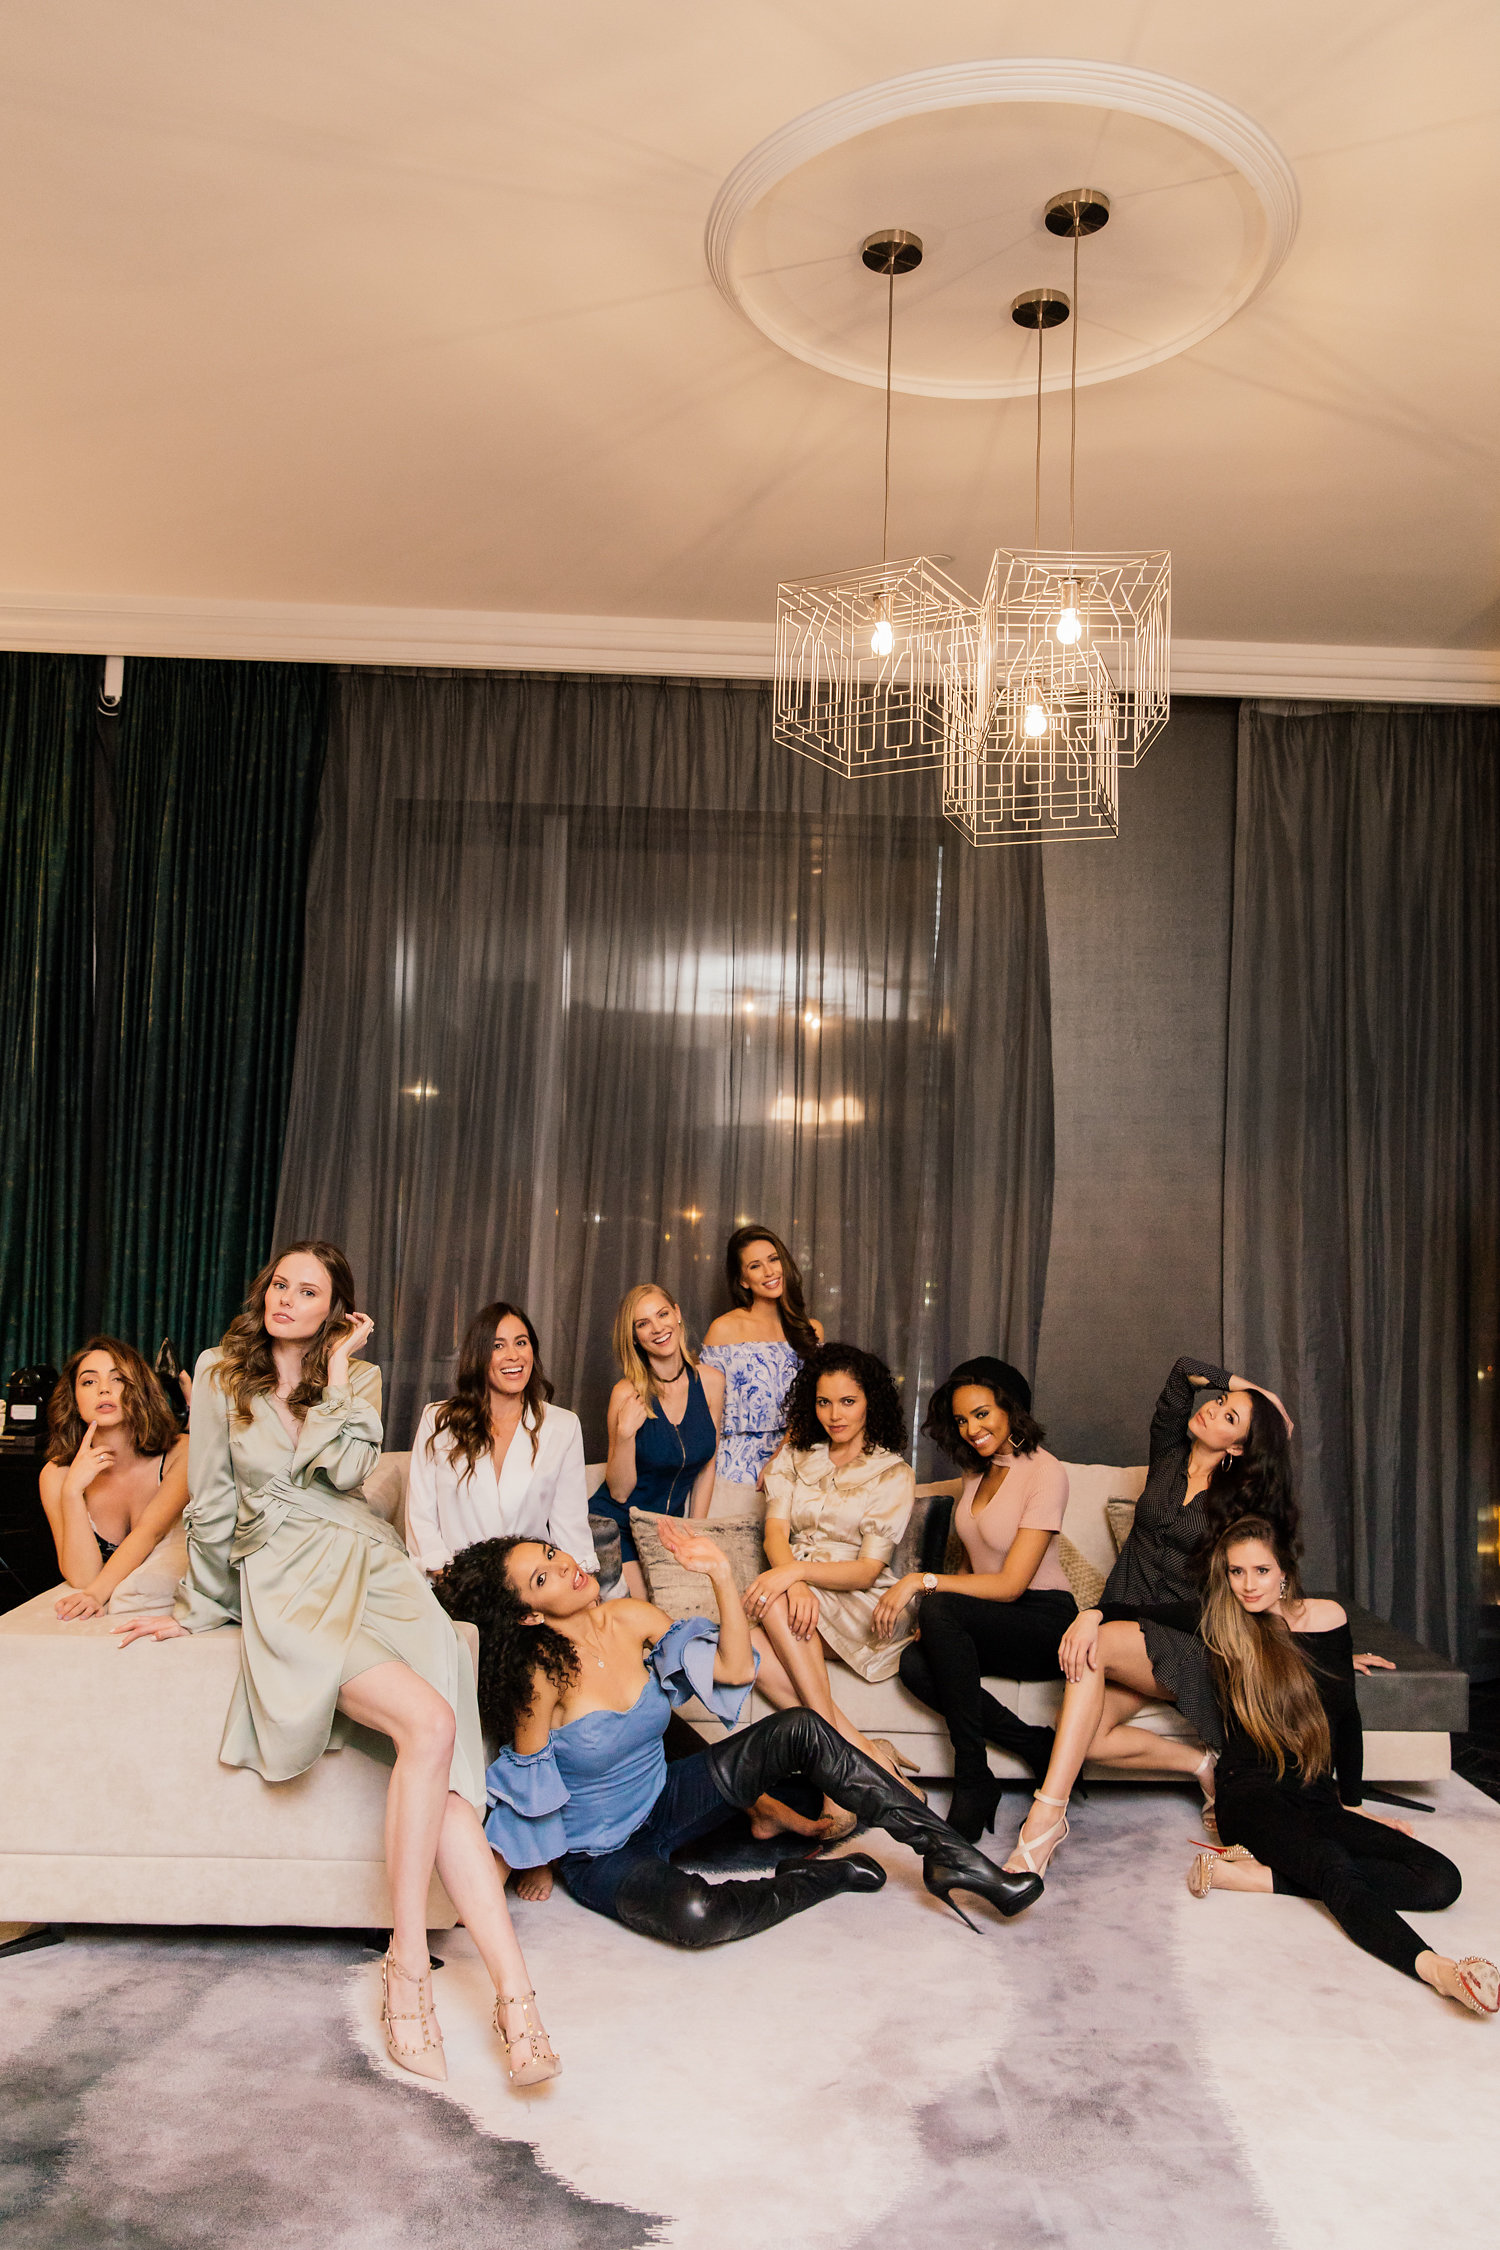 Alyssa Campanella of The A List blog enjoys a girls' night at Hotel Indigo Downtown Los Angeles for their Starlets of the Night package